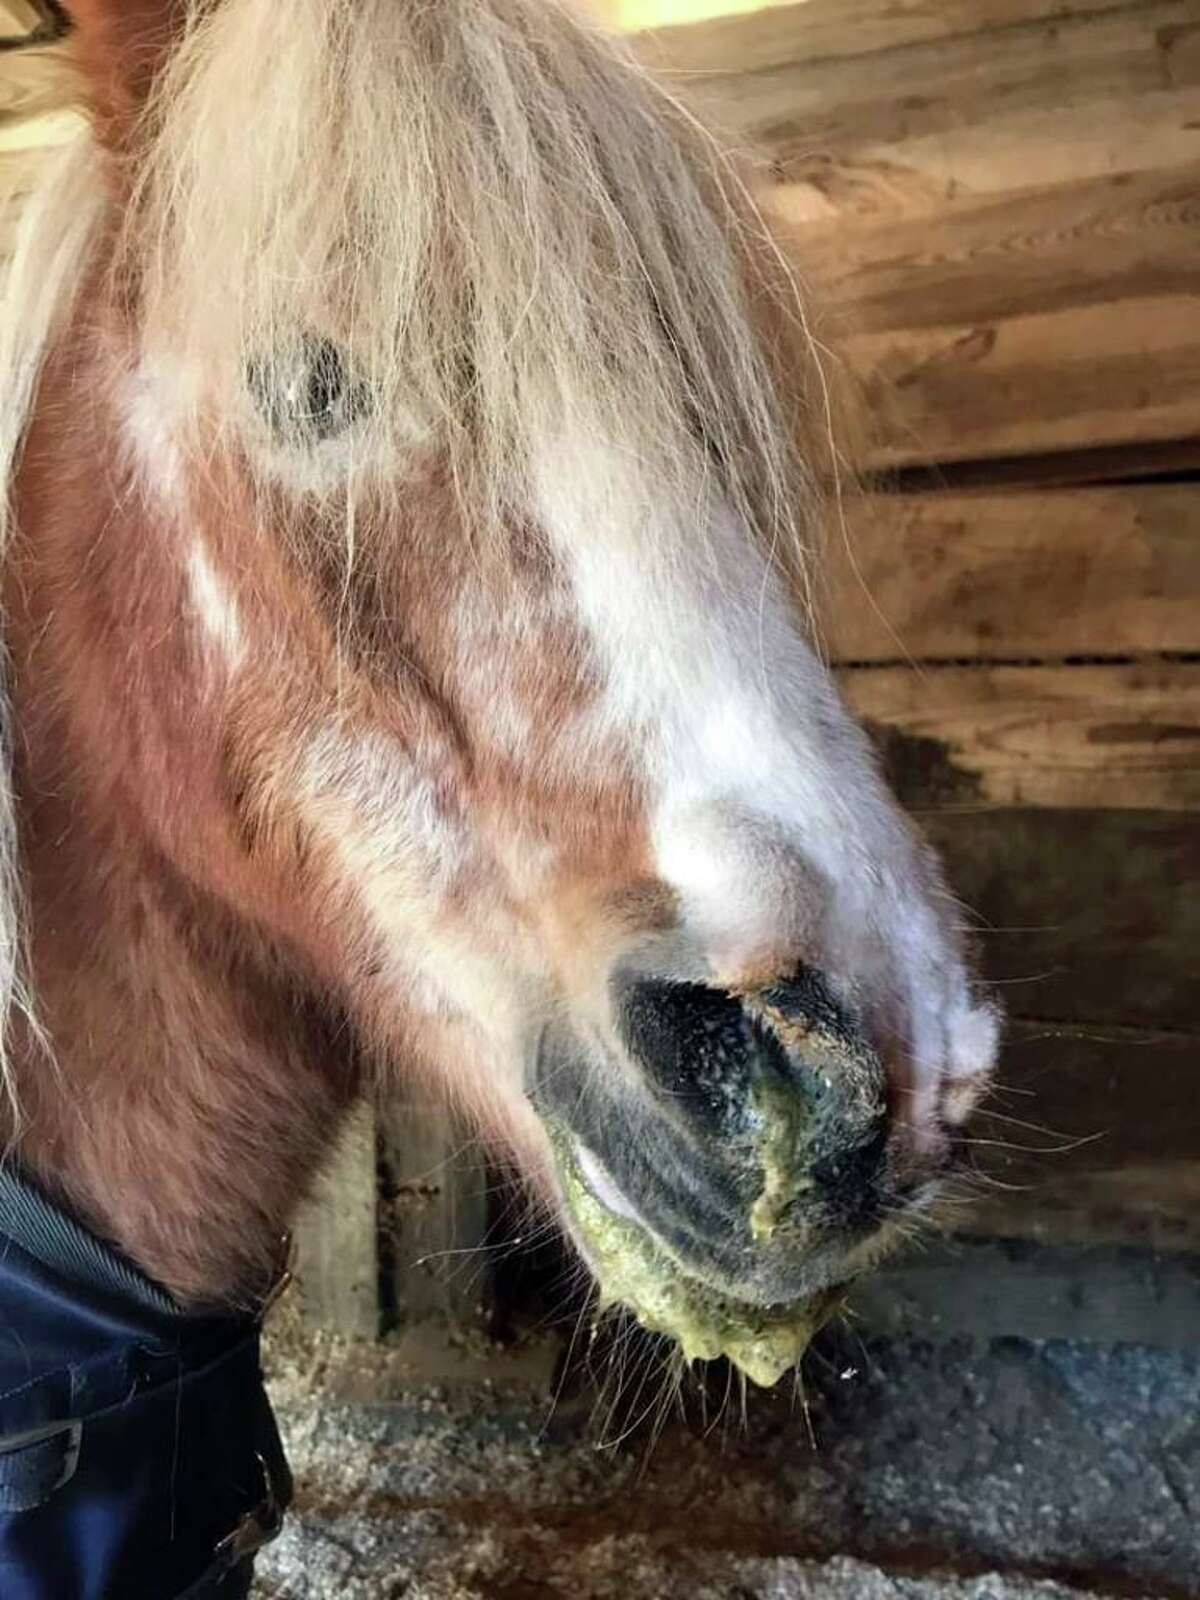 Despite signs requesting that the horses not be fed, Trinket, a pony that resides at Guilford’s Medad Stone Tavern, was fed carrots, resulting in choke.